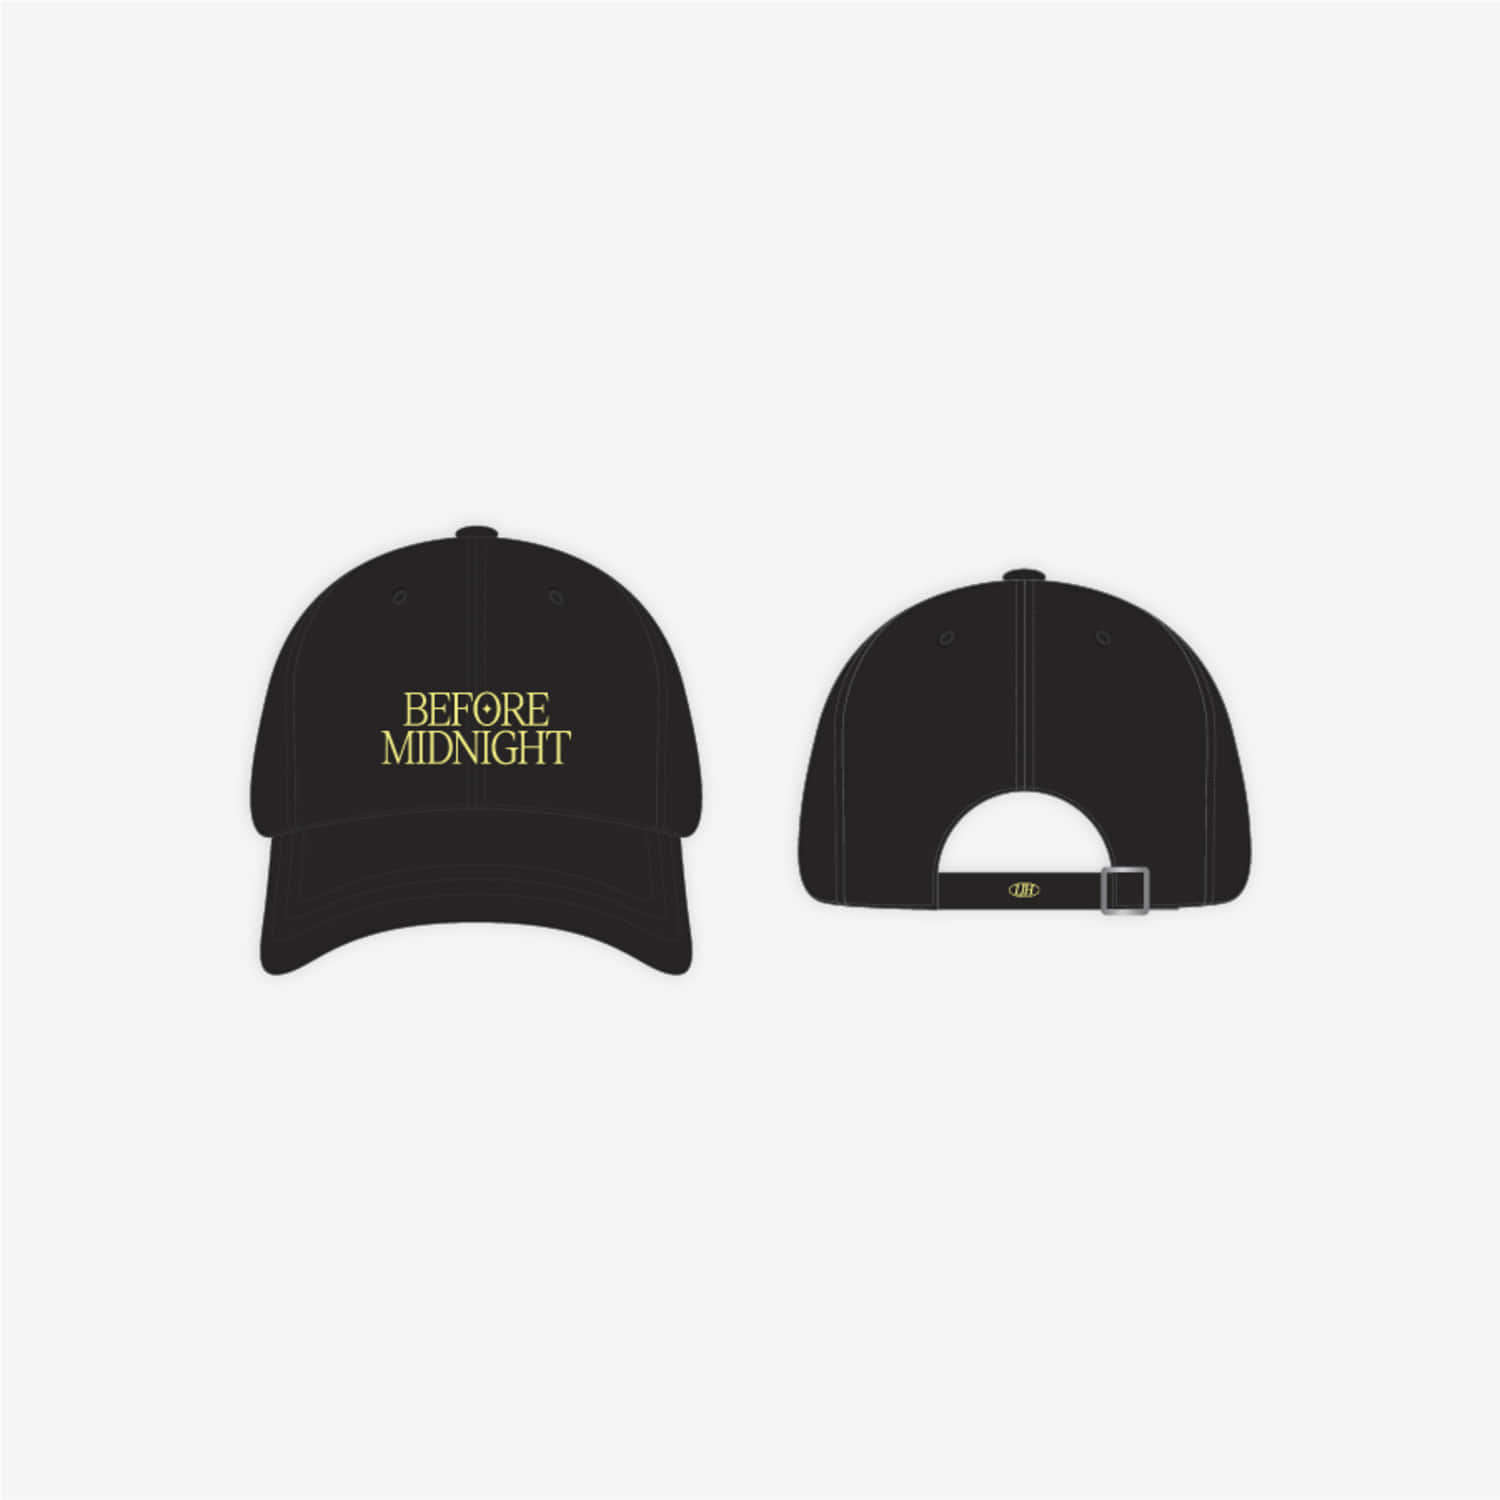 2PM 이준호(LEE JUNHO) [BEFORE MIDNIGHT] OFFICIAL MD - 볼캡 BALL CAP